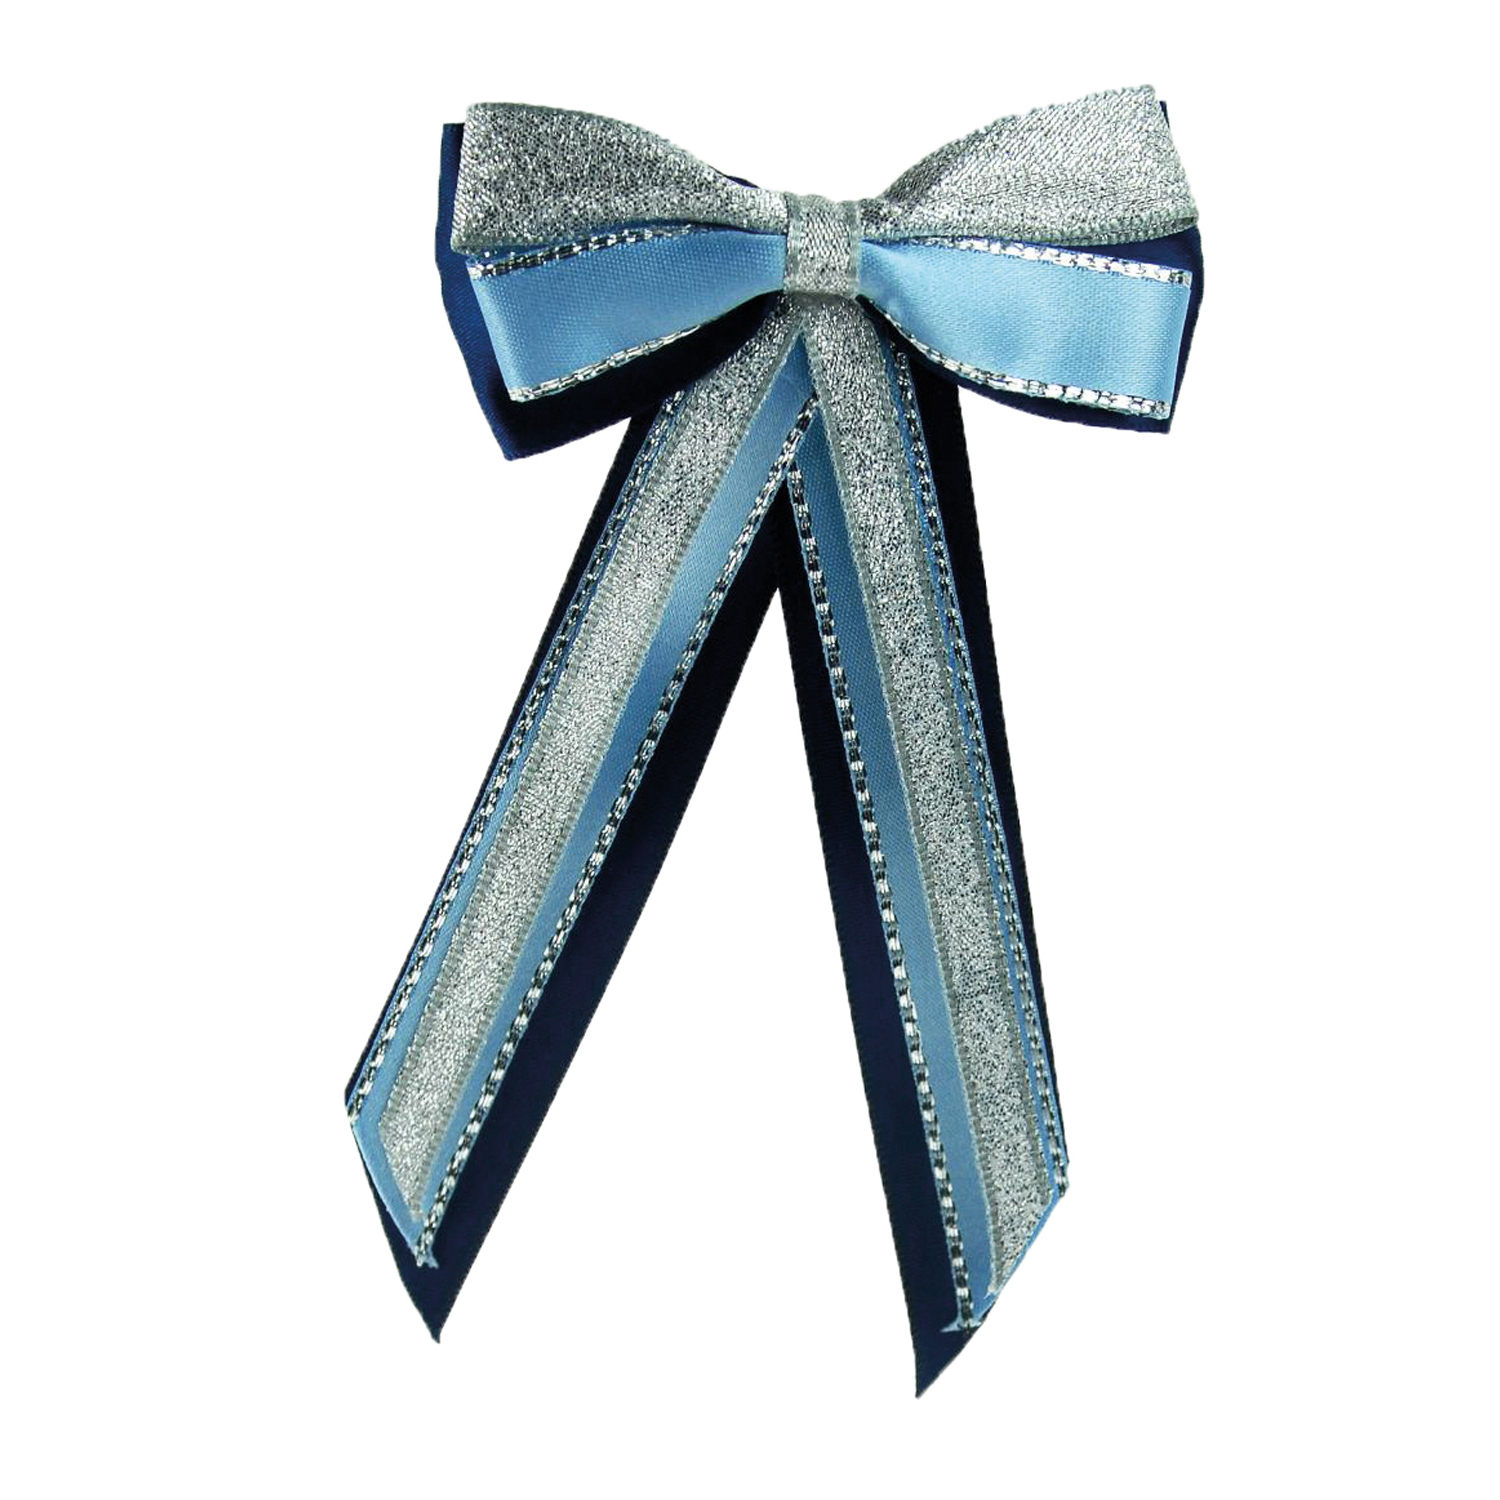 SHOWQUEST HAIRBOW & TAILS NAVY/PALE BLUE/SILVER